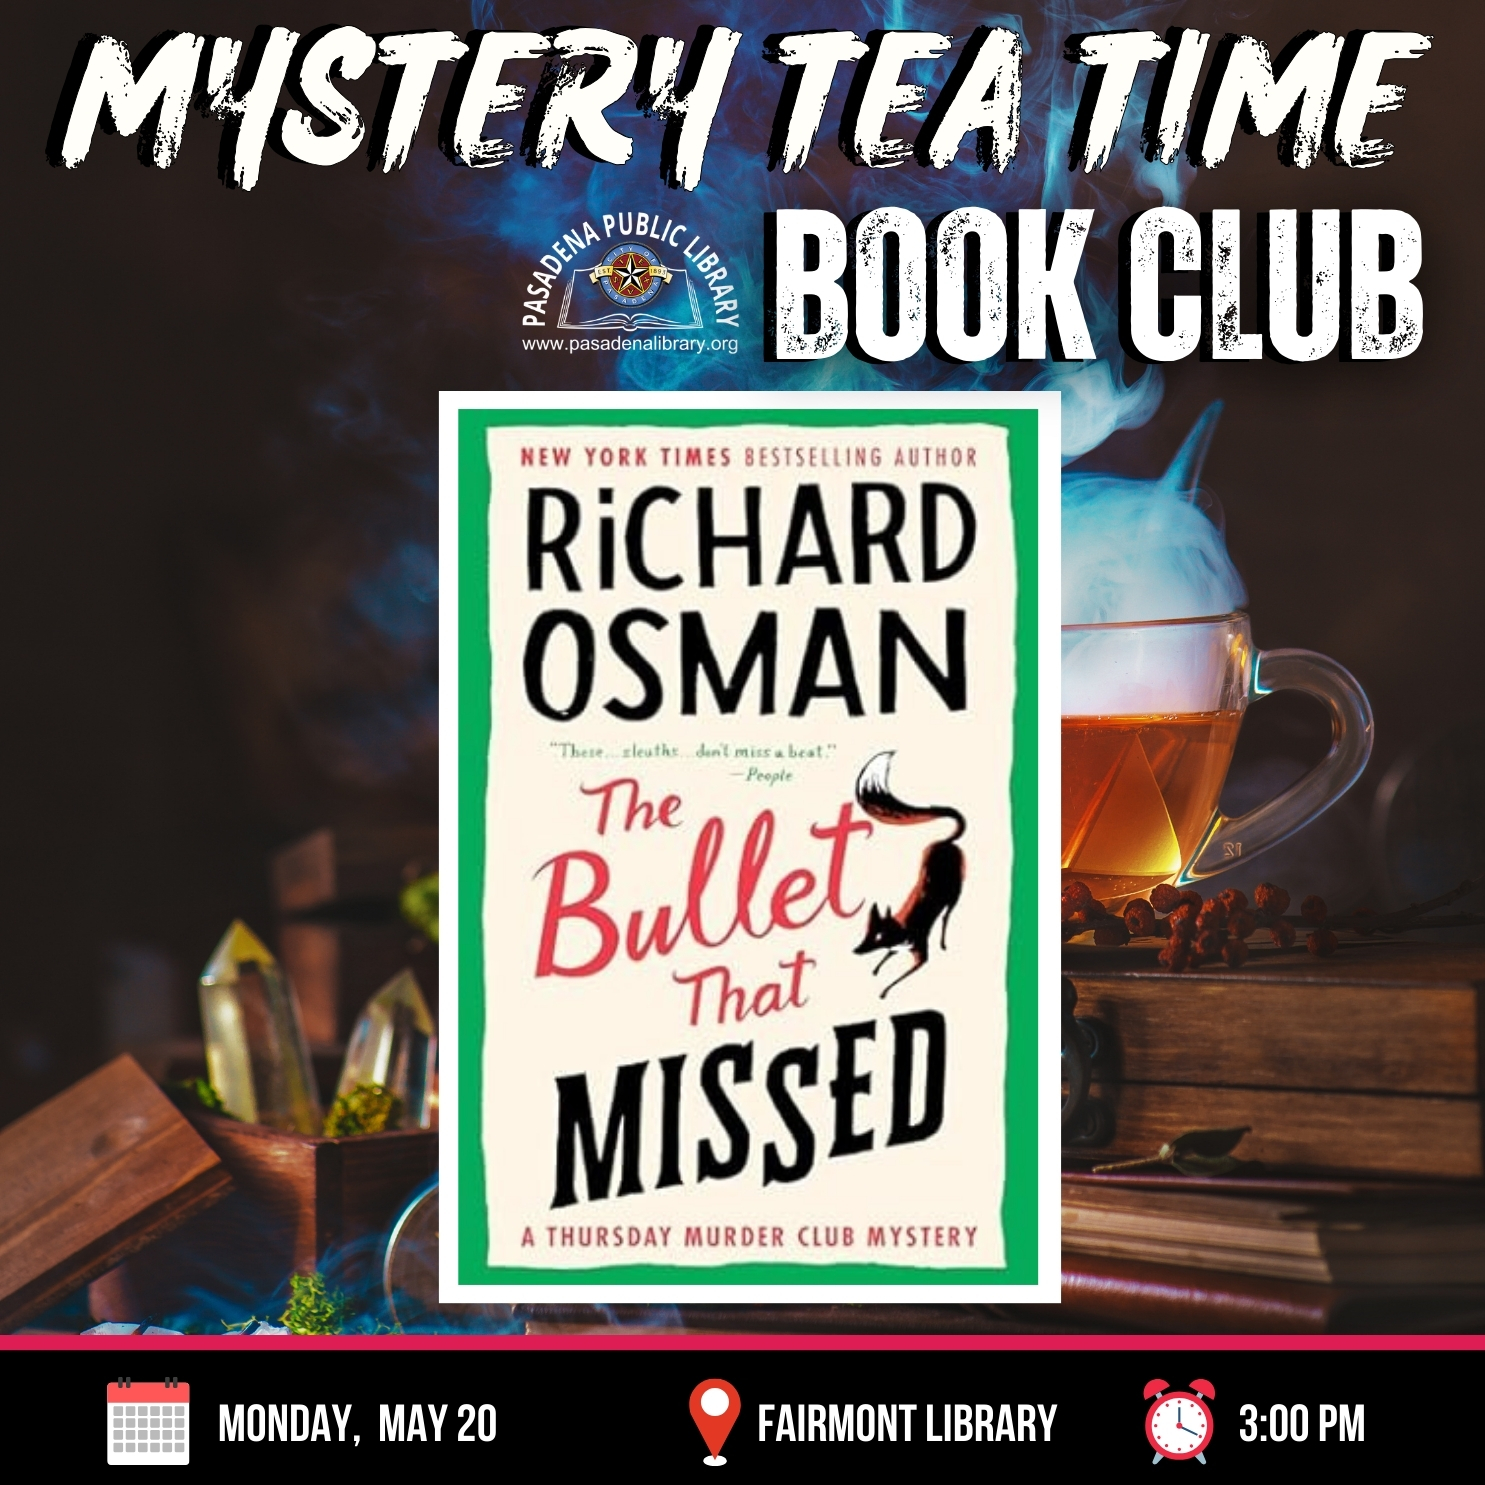 FAIRMONT: Mystery Tea Time Book Club - "The Bullet That Missed" by Richard Osman